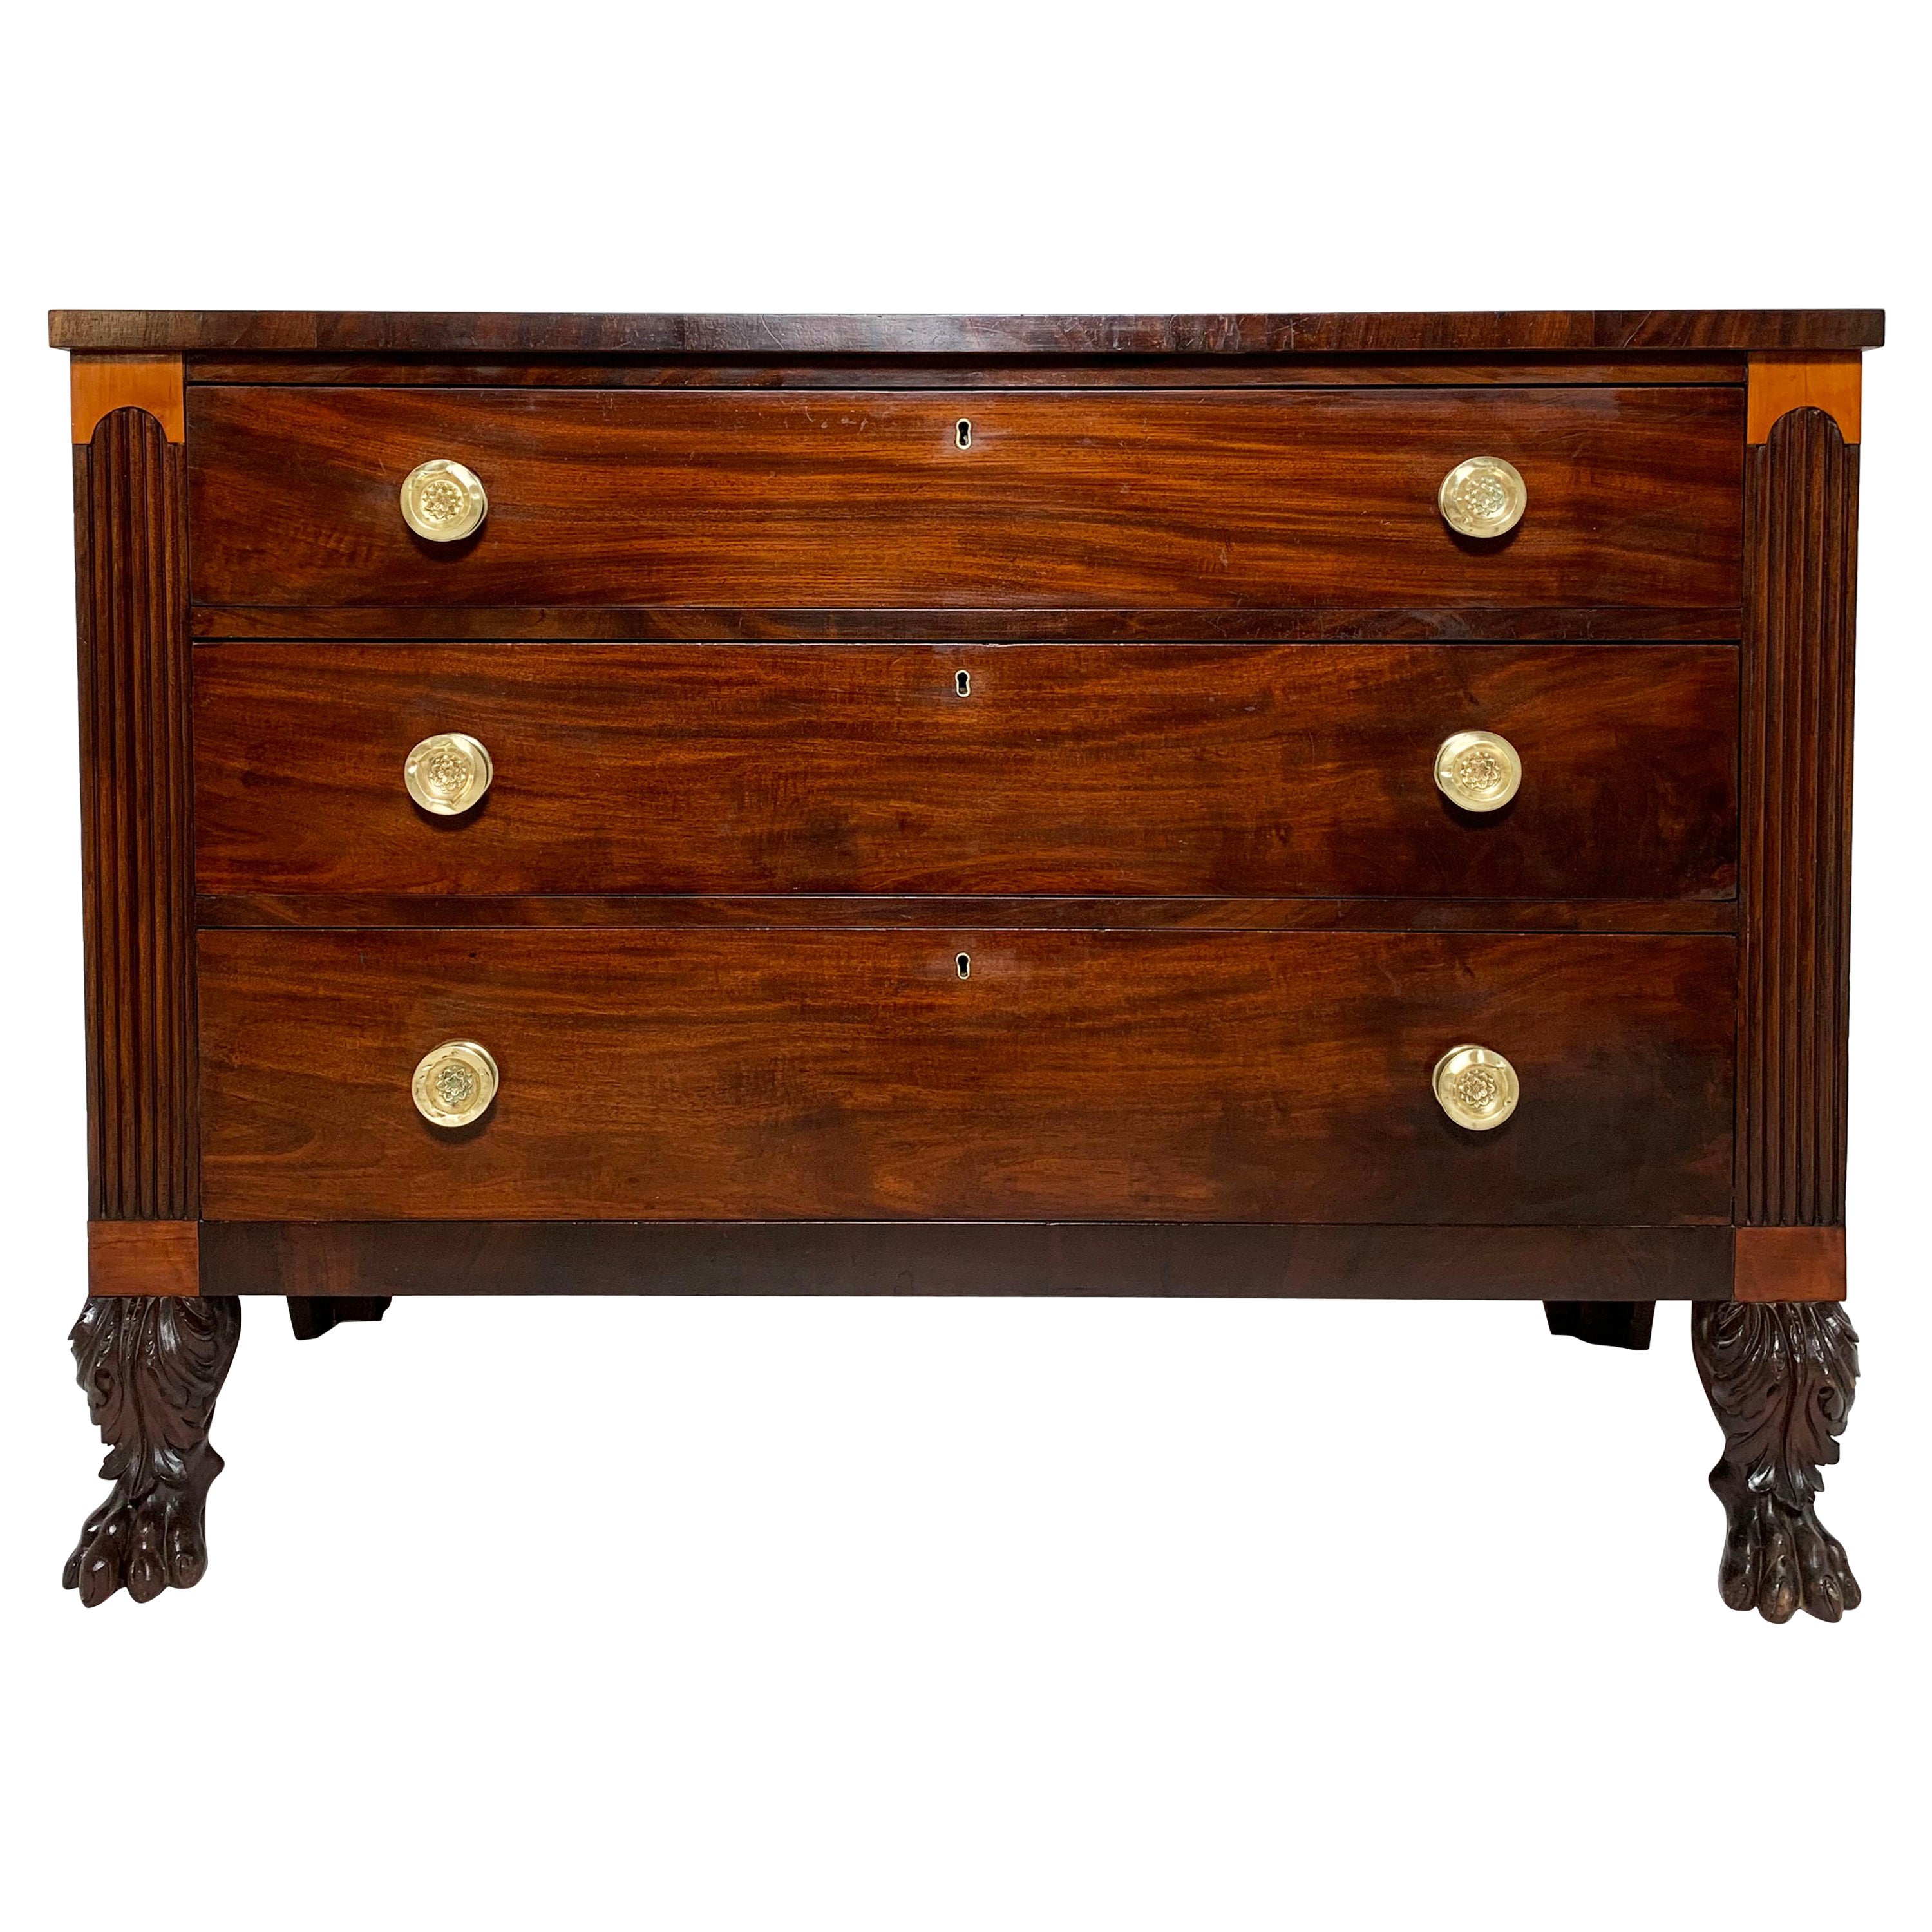 Antique Federal Chest of Drawers, Rhode Island, circa 1820s